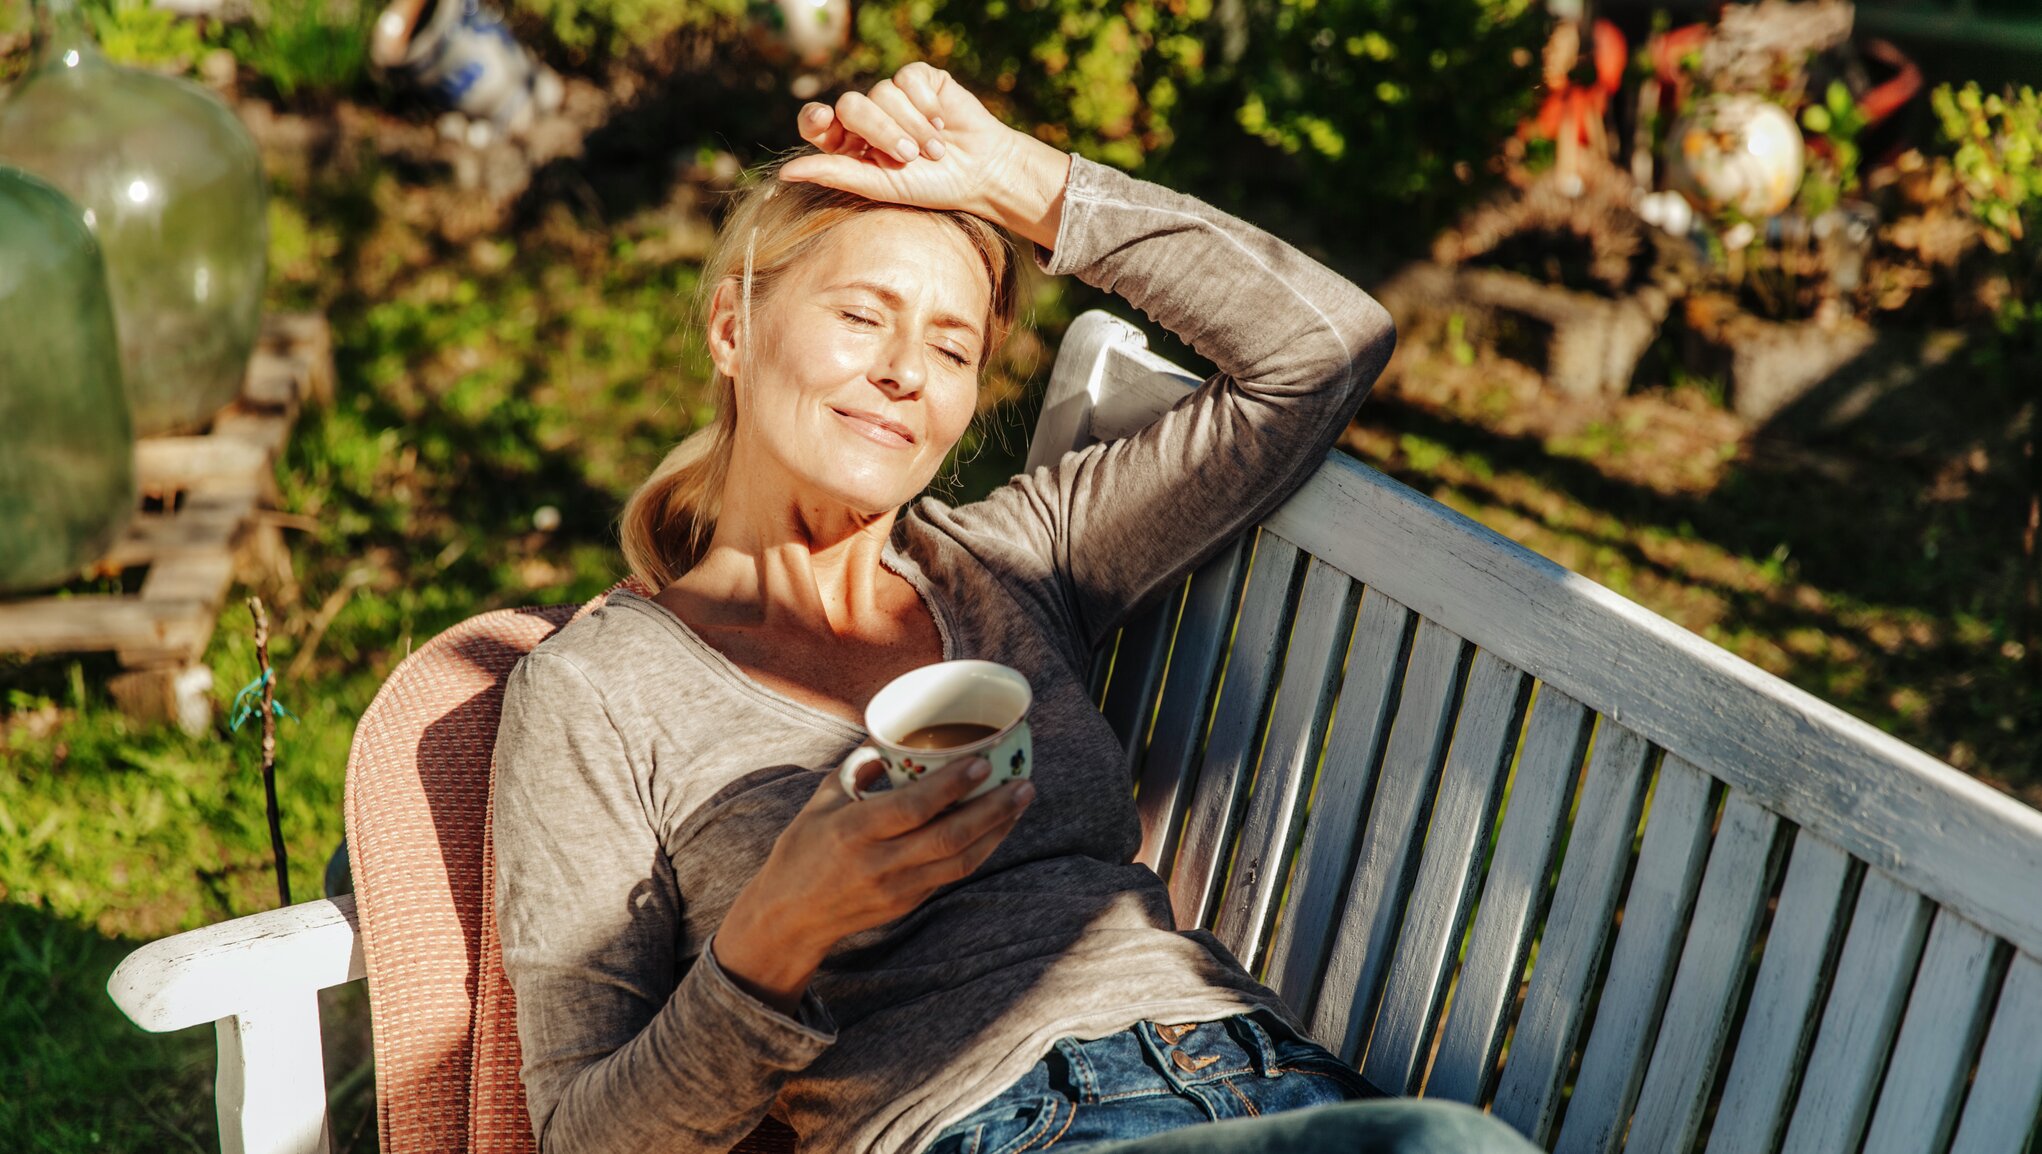 person enjoying a cup of coffee in the sun.